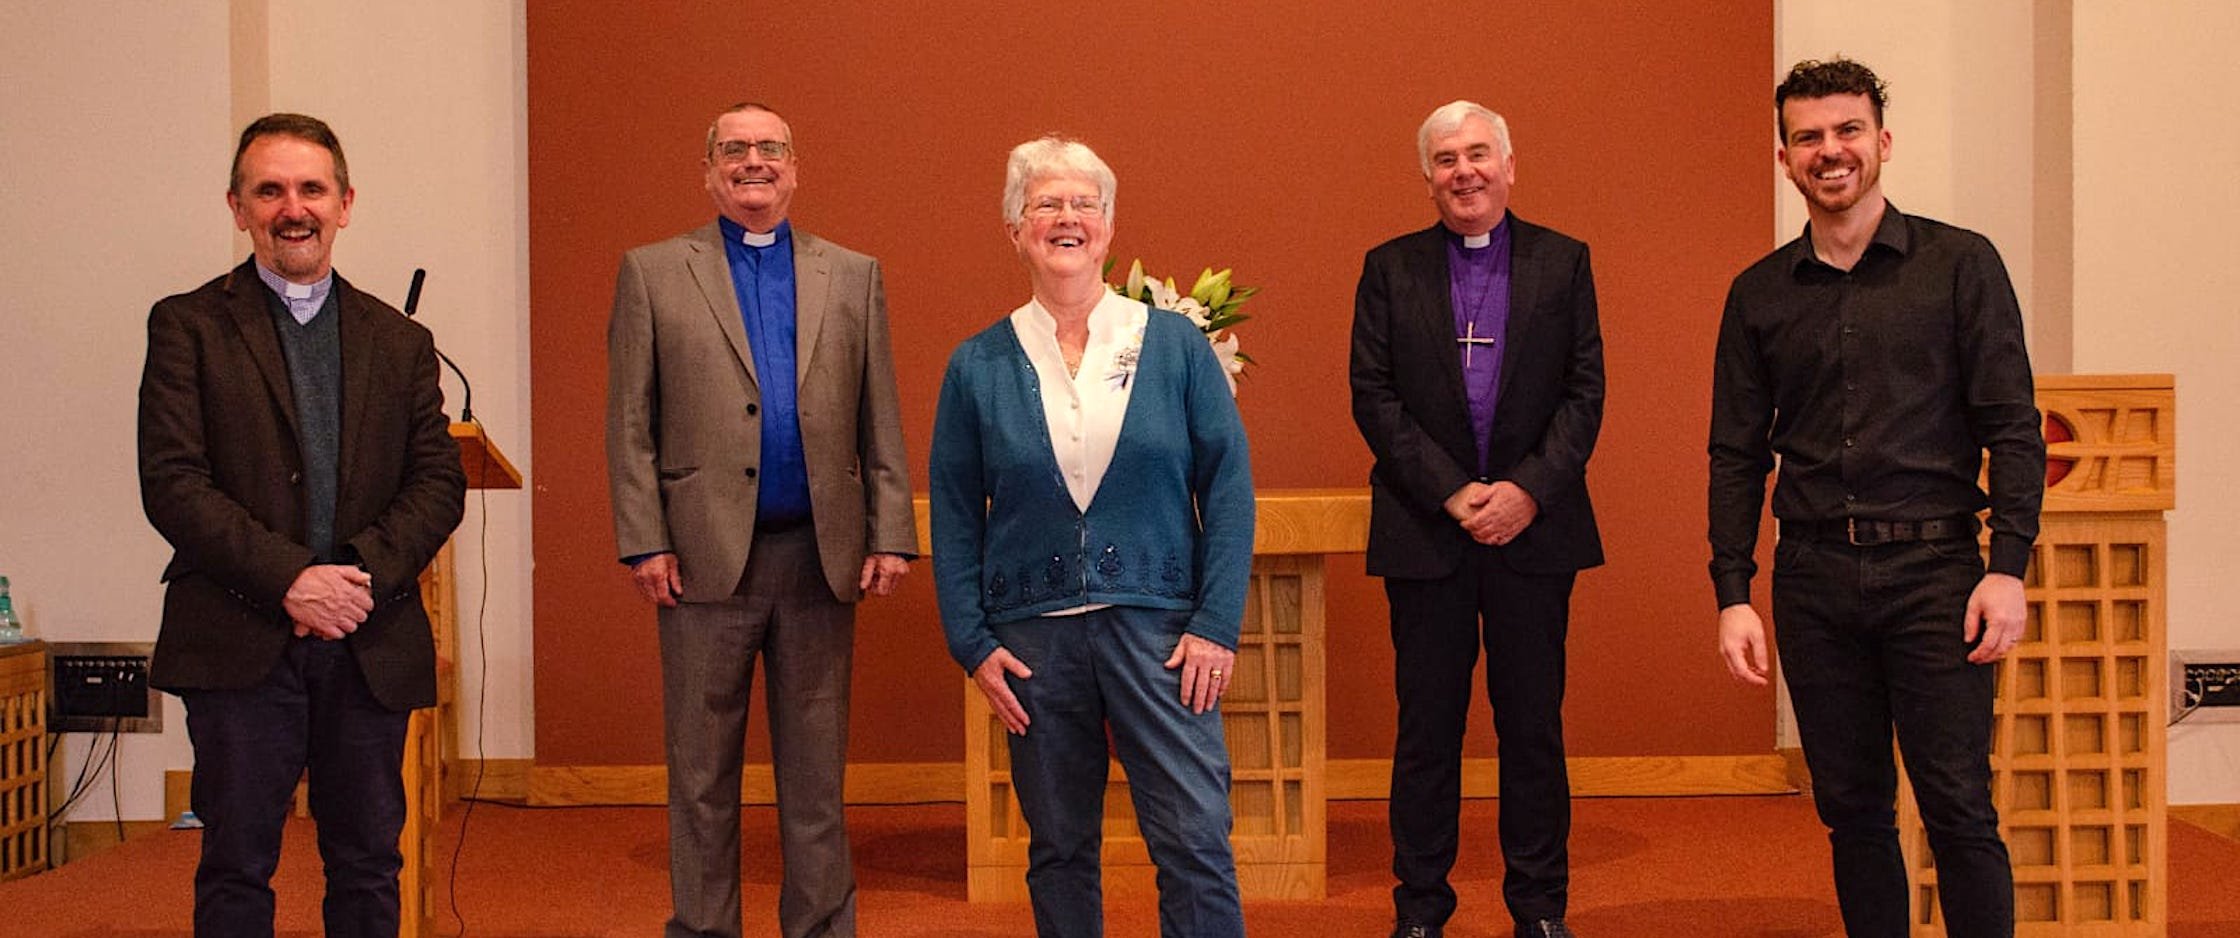 Left to right: The Revd Alan Peek, the Revd Philip Agnew, Mrs Rosie Lappin (Lay Reader), Bishop David McClay and the Revd Michael Spence.